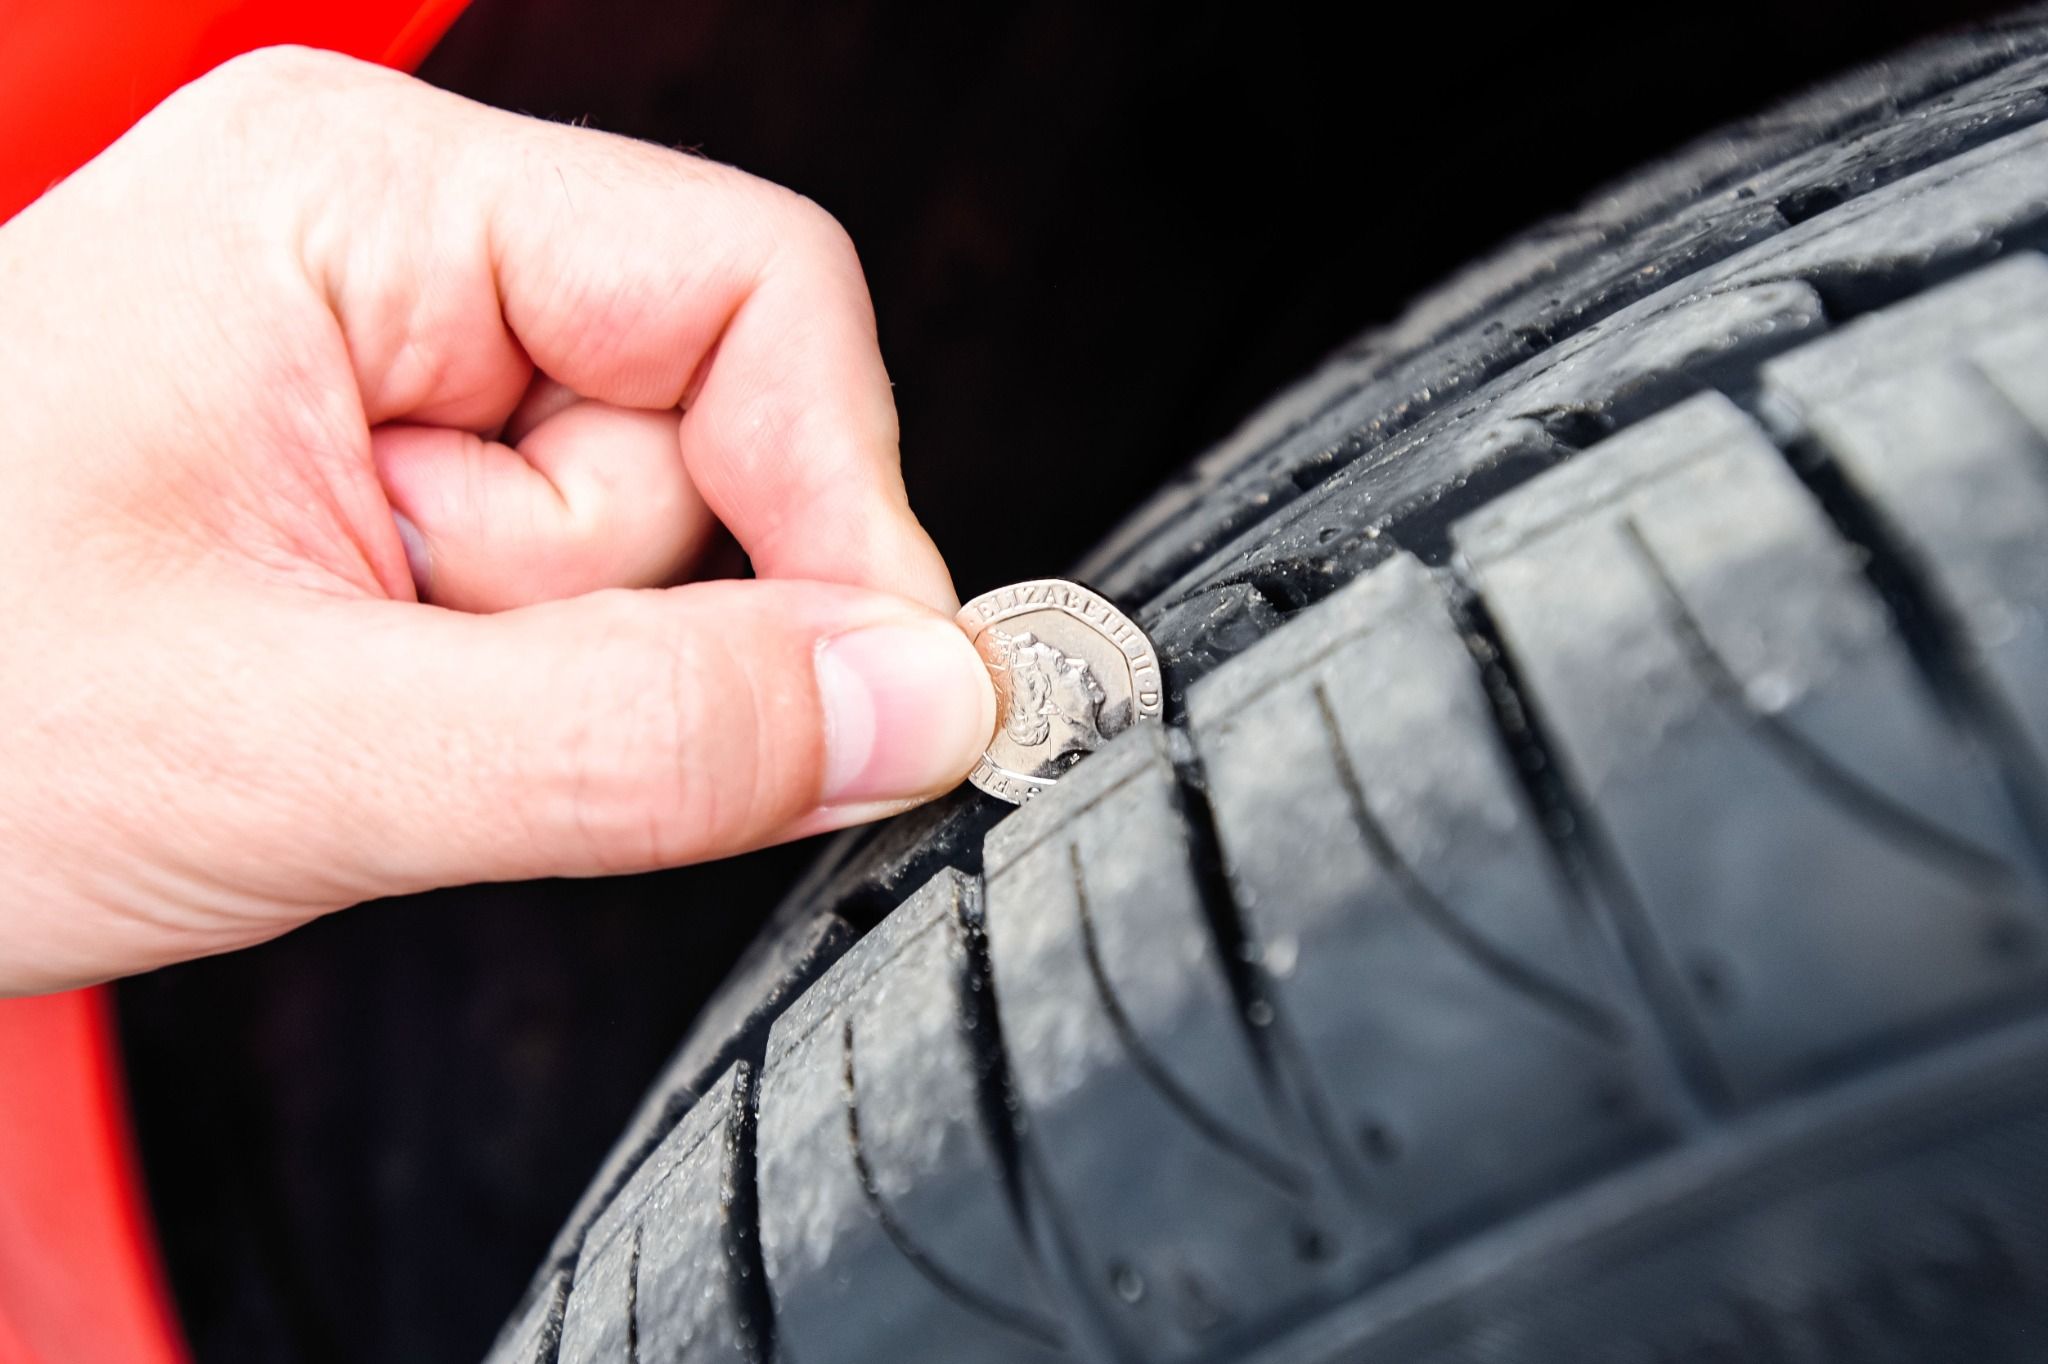 Tyre Tread check with a 20p coin